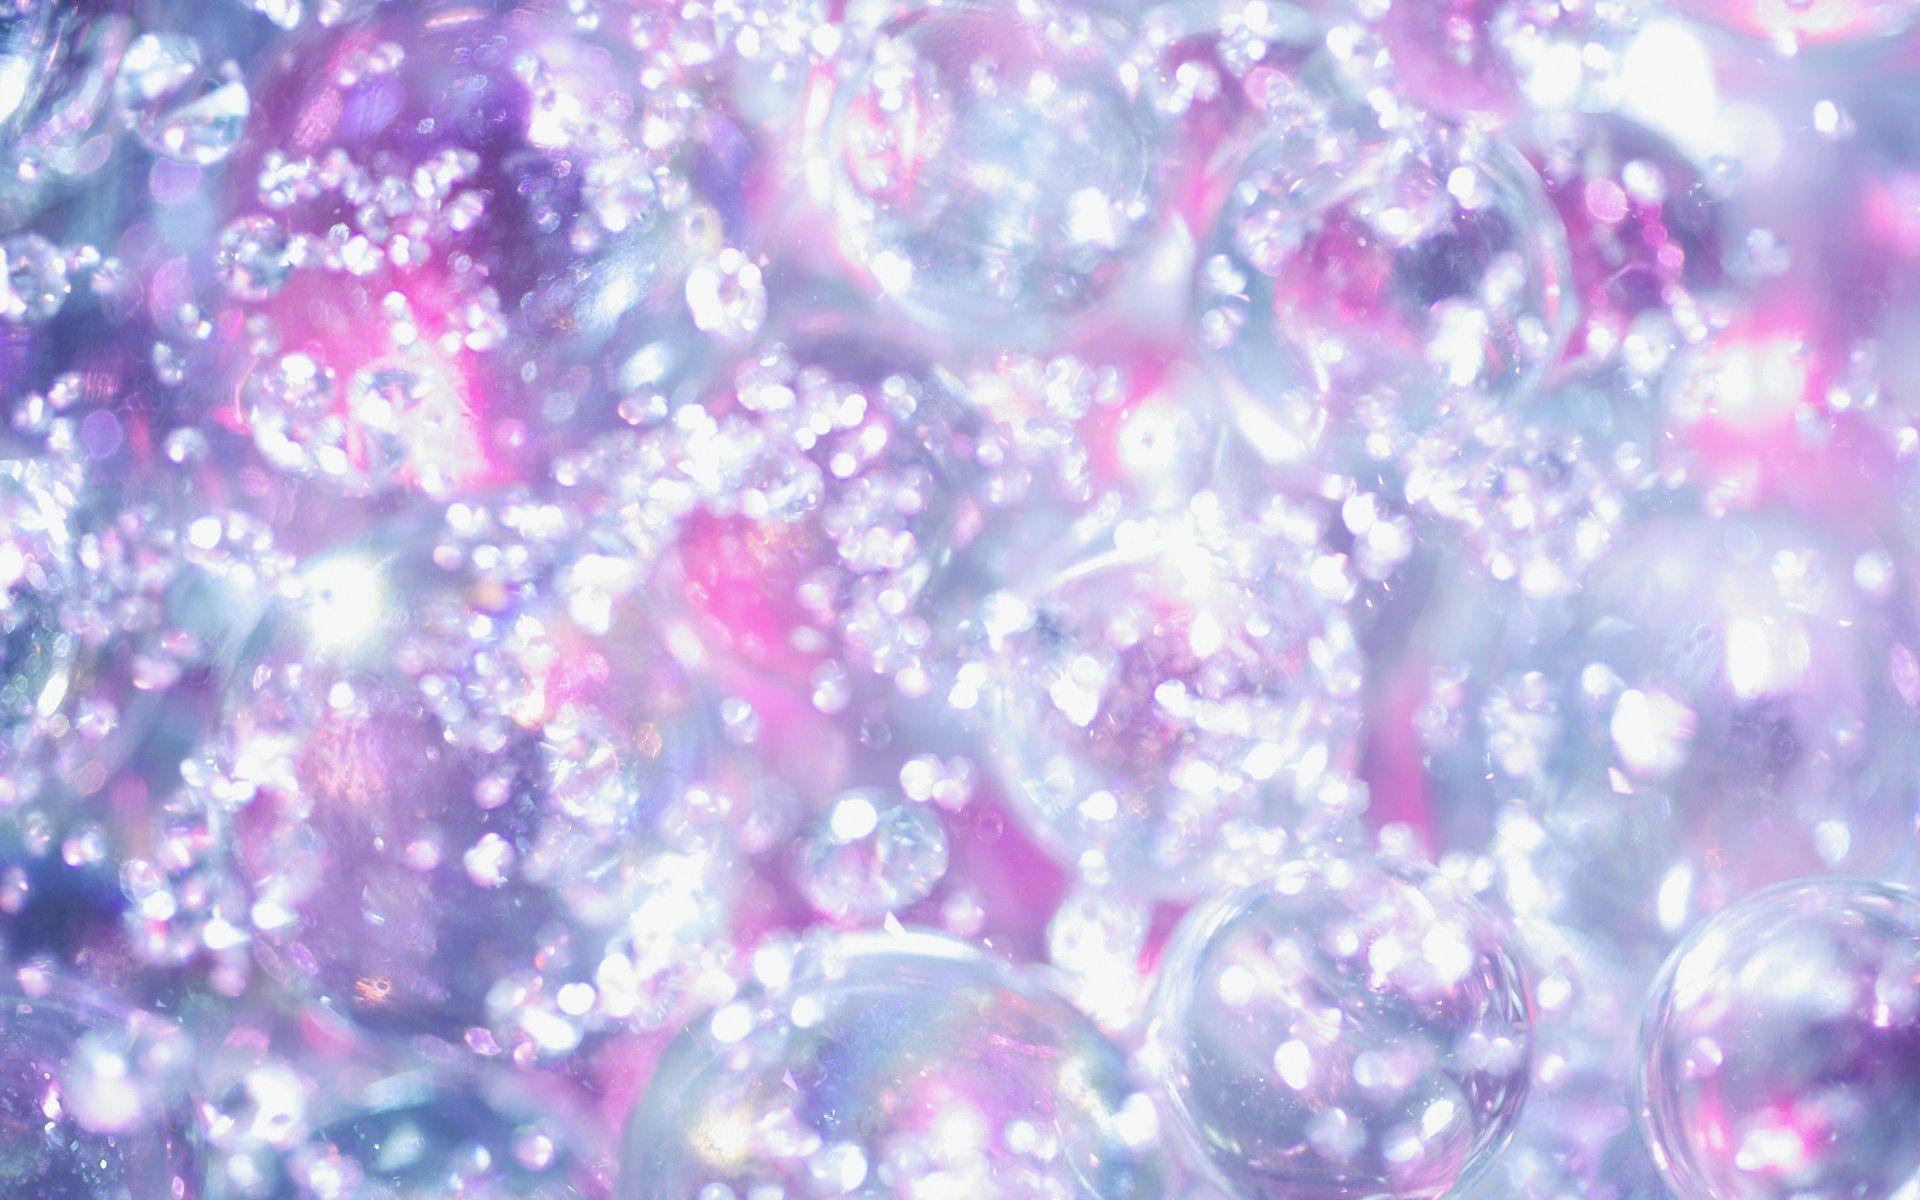 Wallpaper For > Sparkly Wallpaper